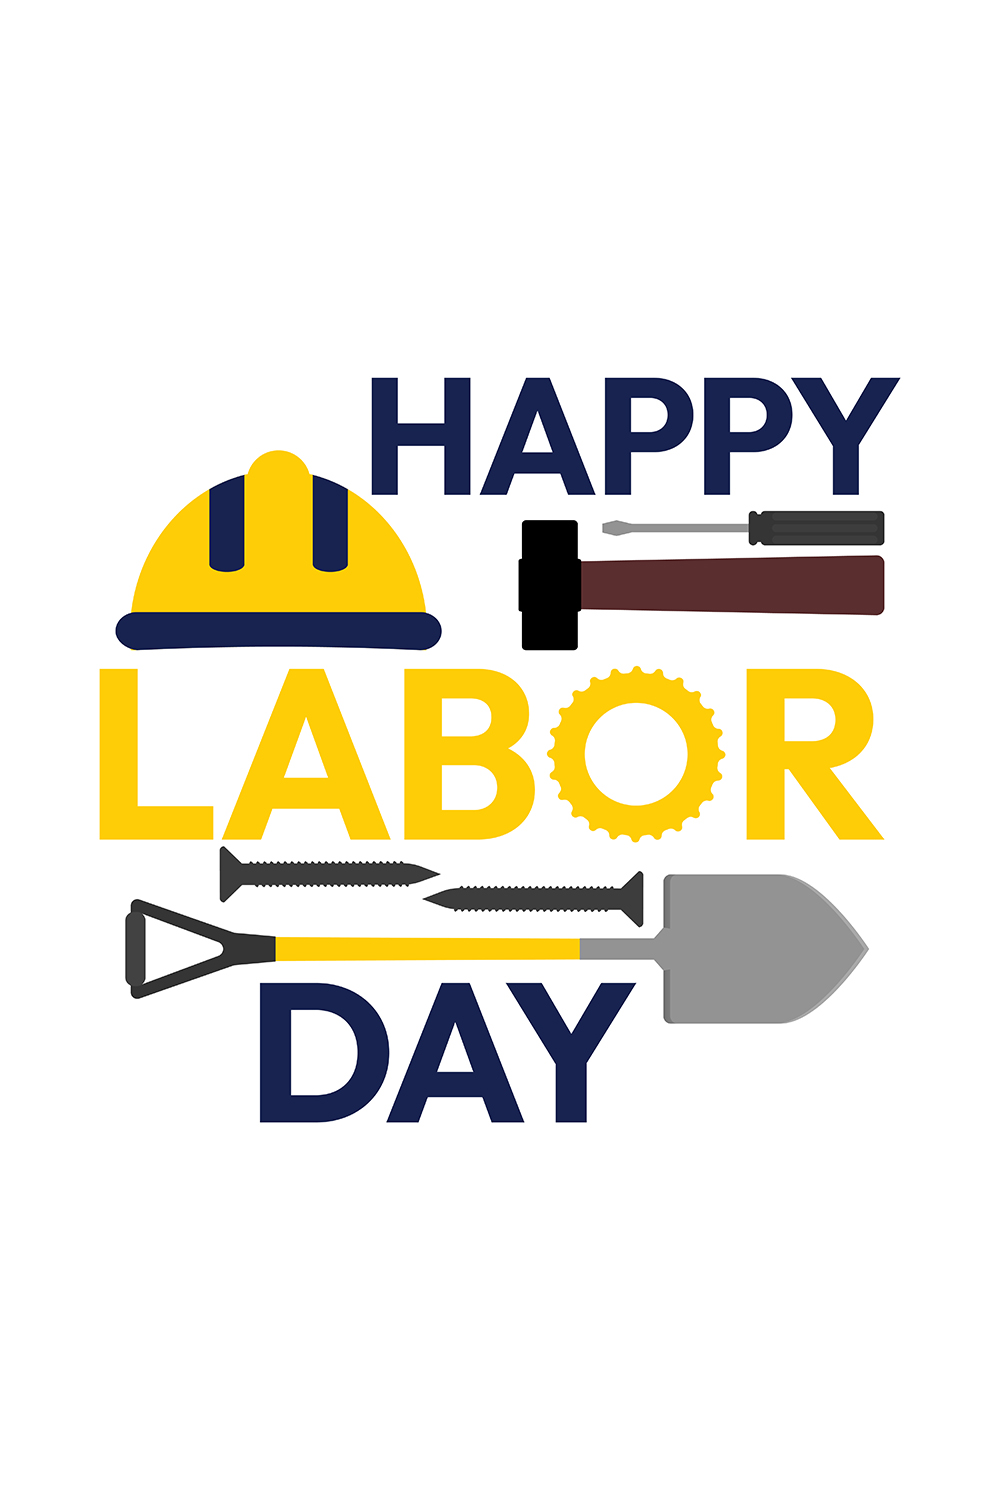 Labor day design templates pinterest preview image.